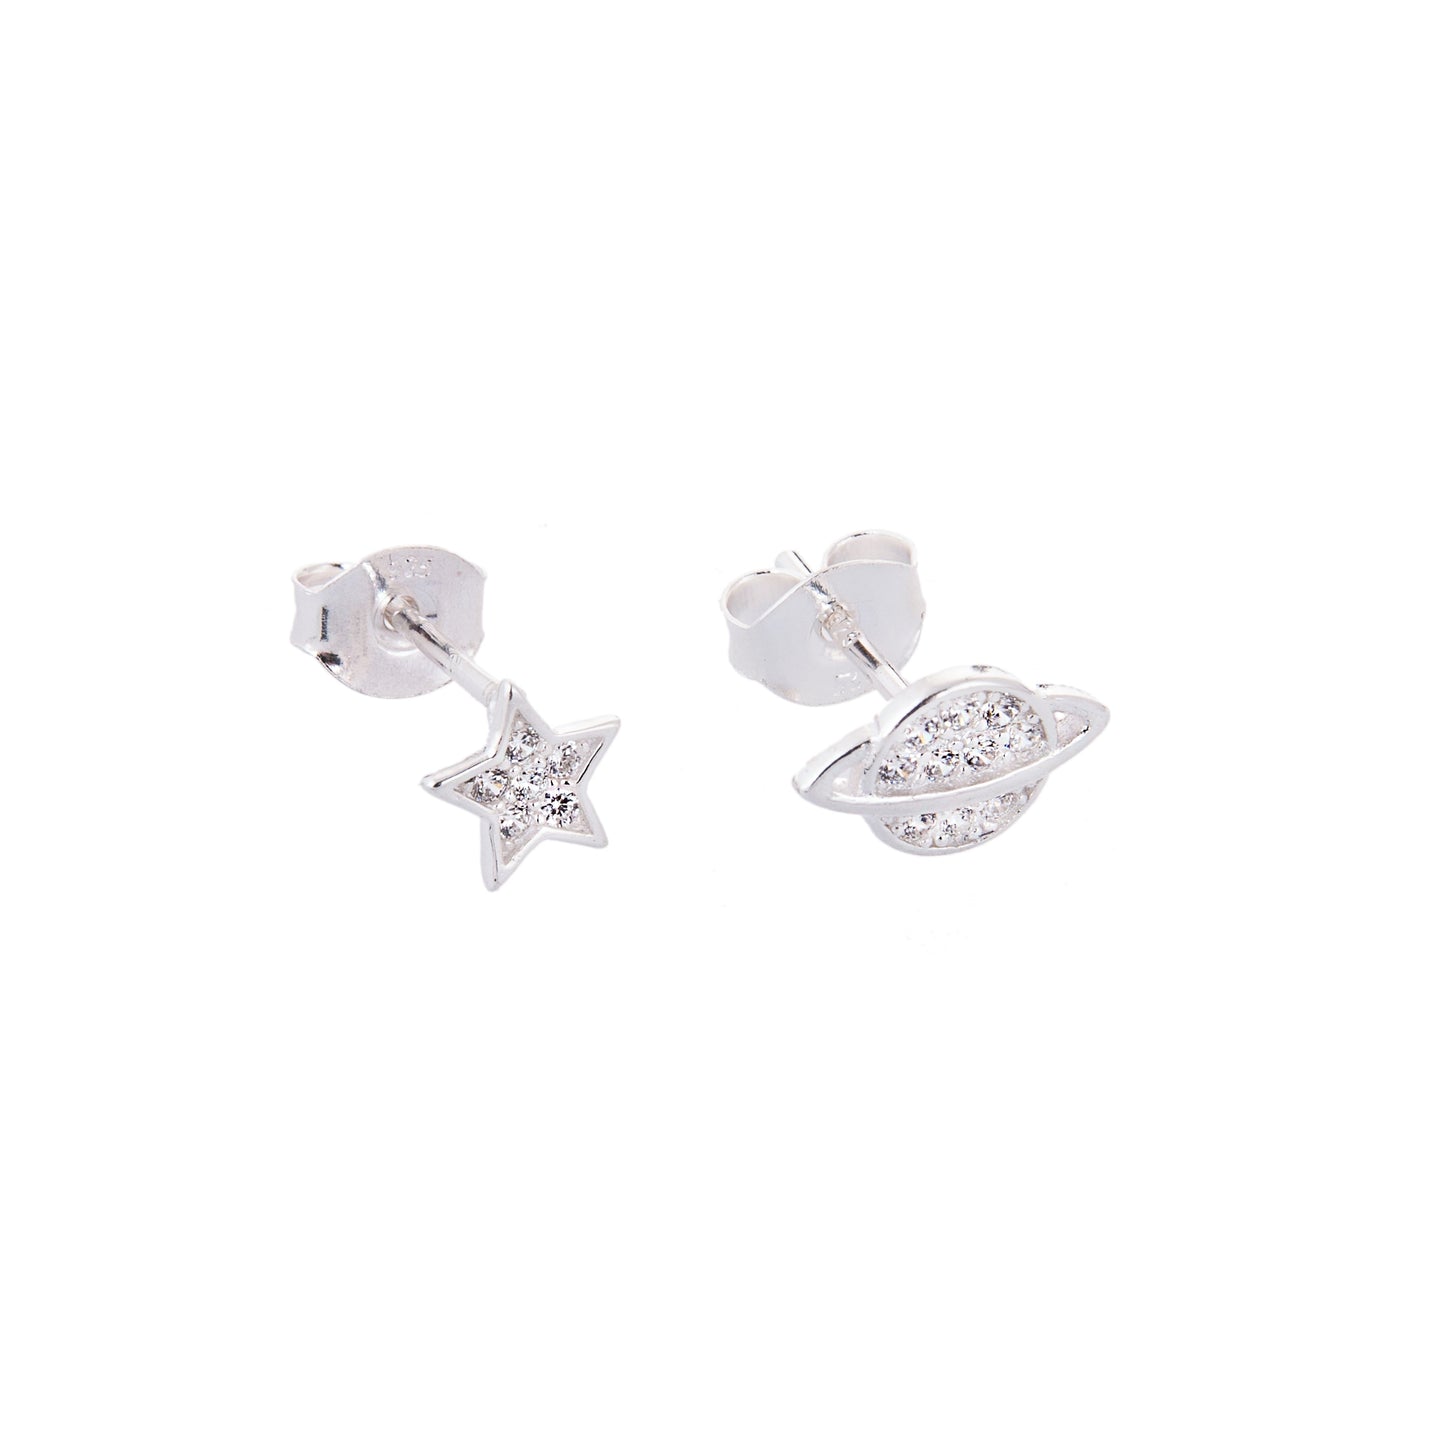 Sterling Silver Star Planet Mix & Match Clear CZ Pave Stud Earrings